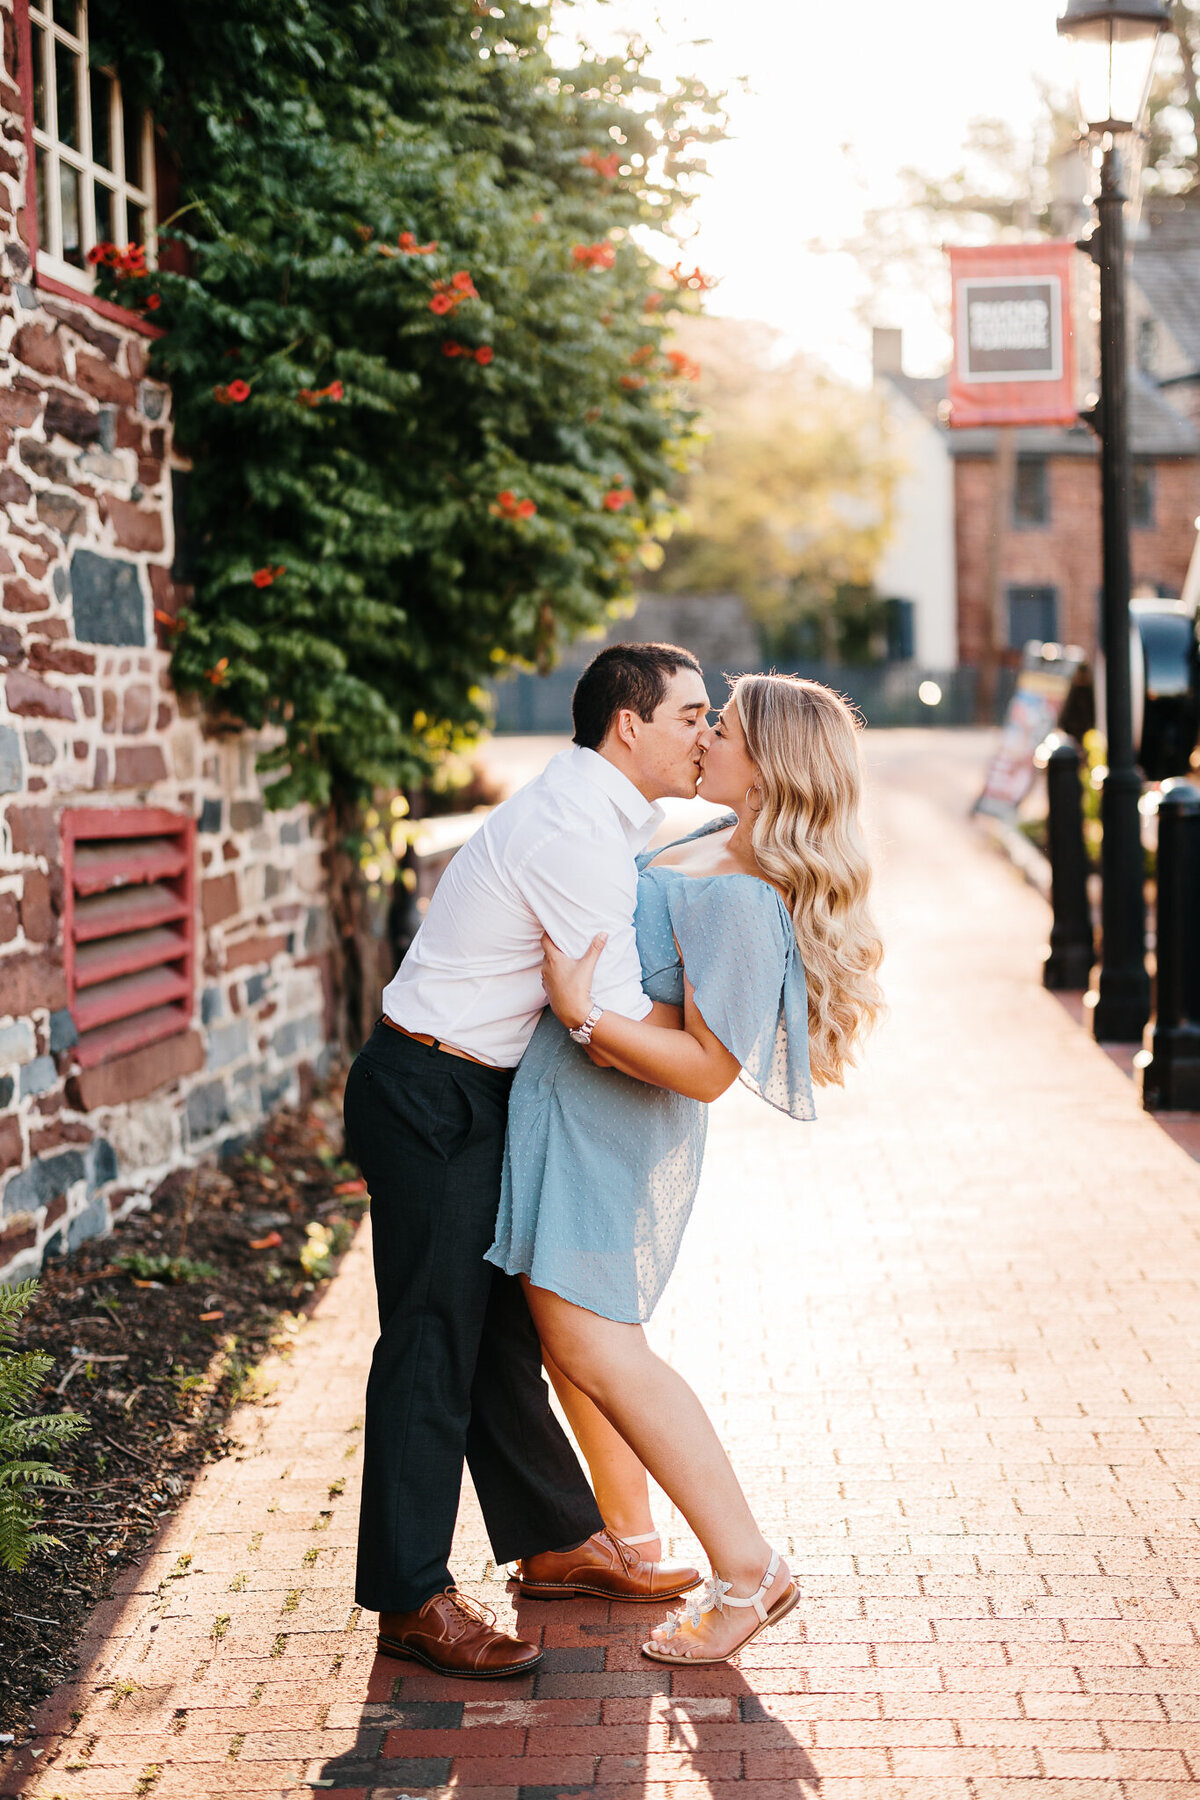 summer-new-hope-engagement-photos-rebecca-renner-photography-3